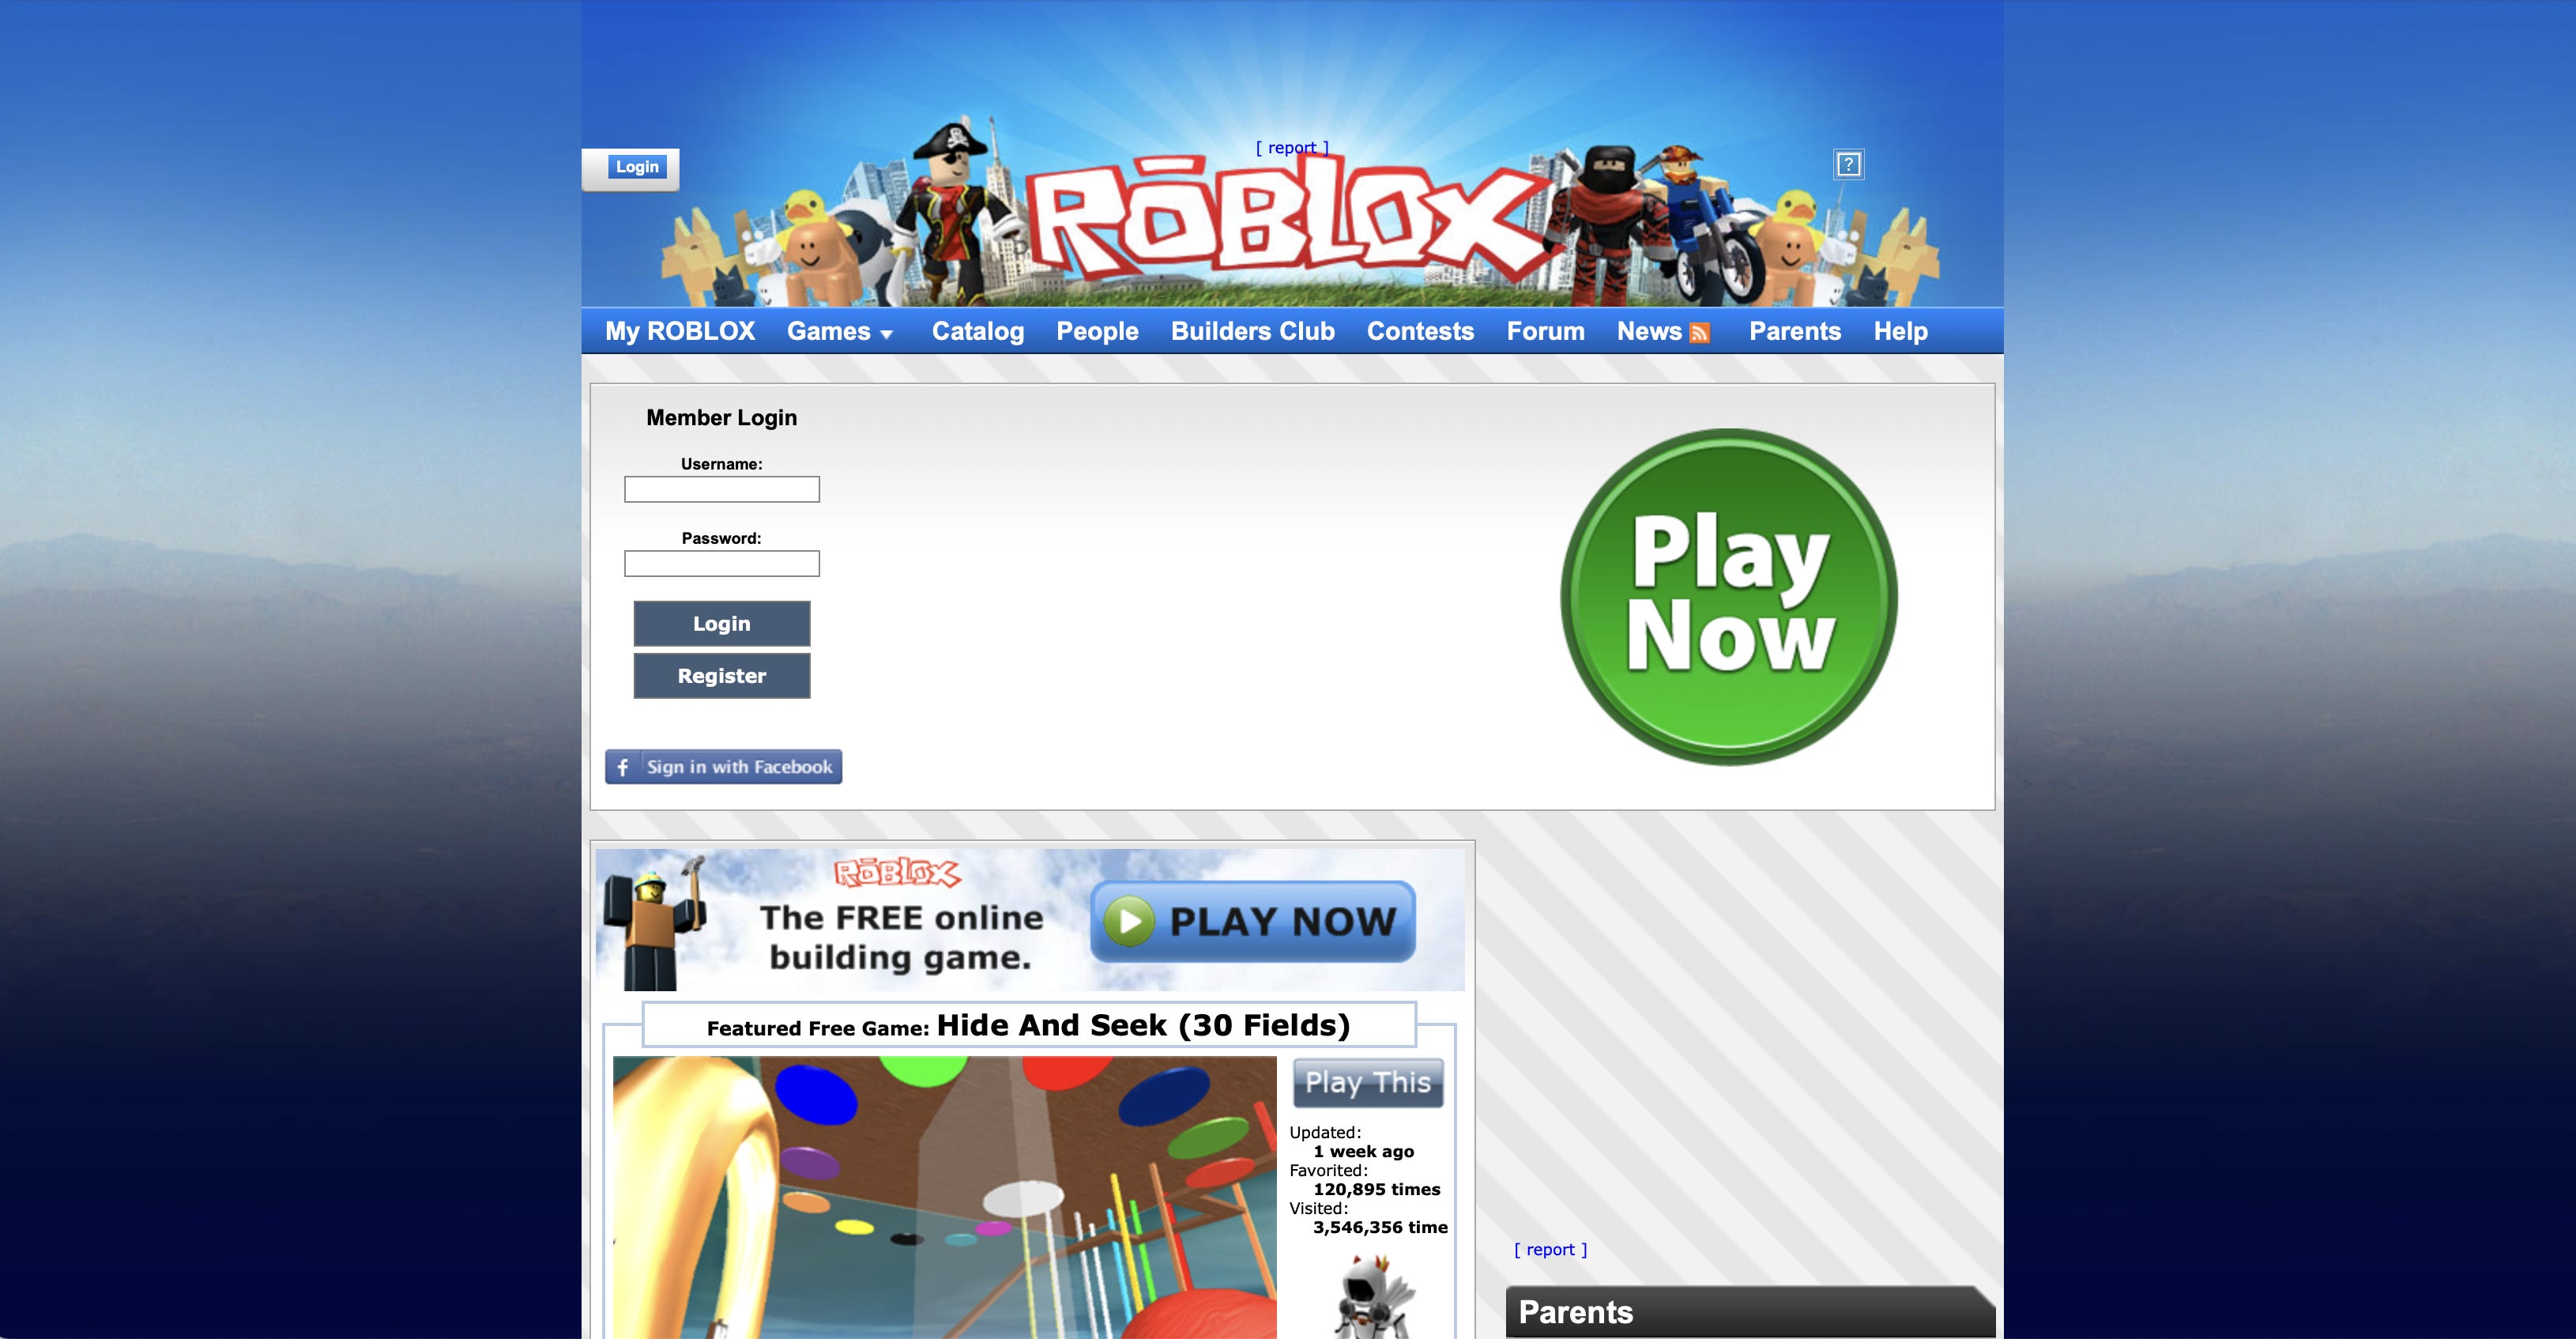 Roblox S Growth Strategies And Why Becoming A Metaverse Is A Bad Idea By Benjamin Schroeder No Ordinary Strategy - roblox machine learning engineer